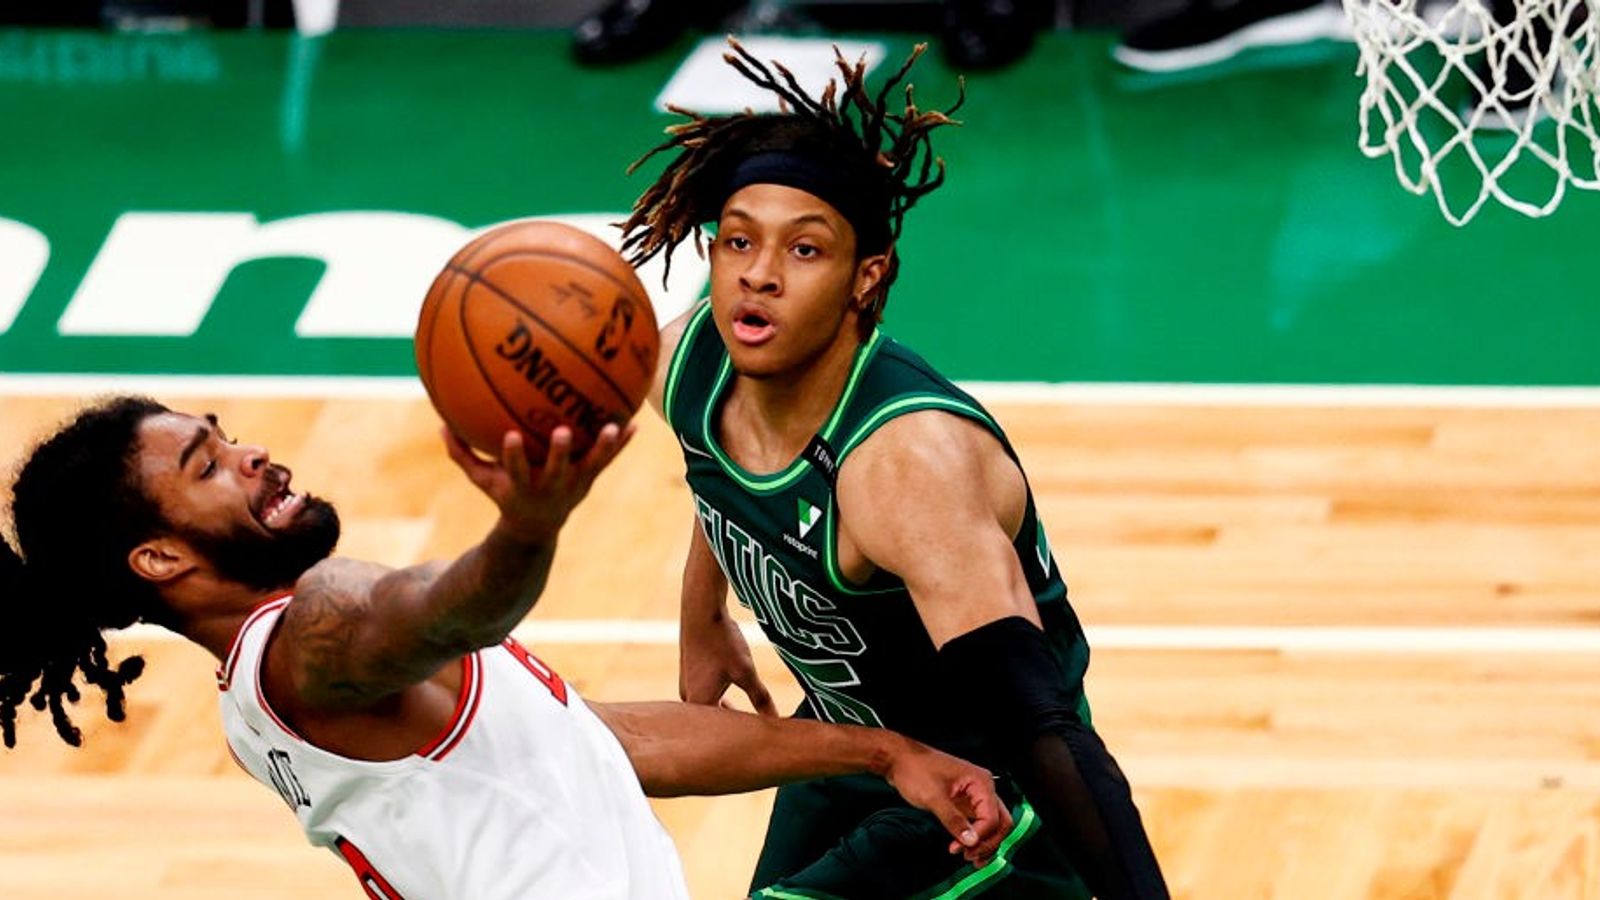 Indiana Basketball: Celtics' Romeo Langford fully cleared